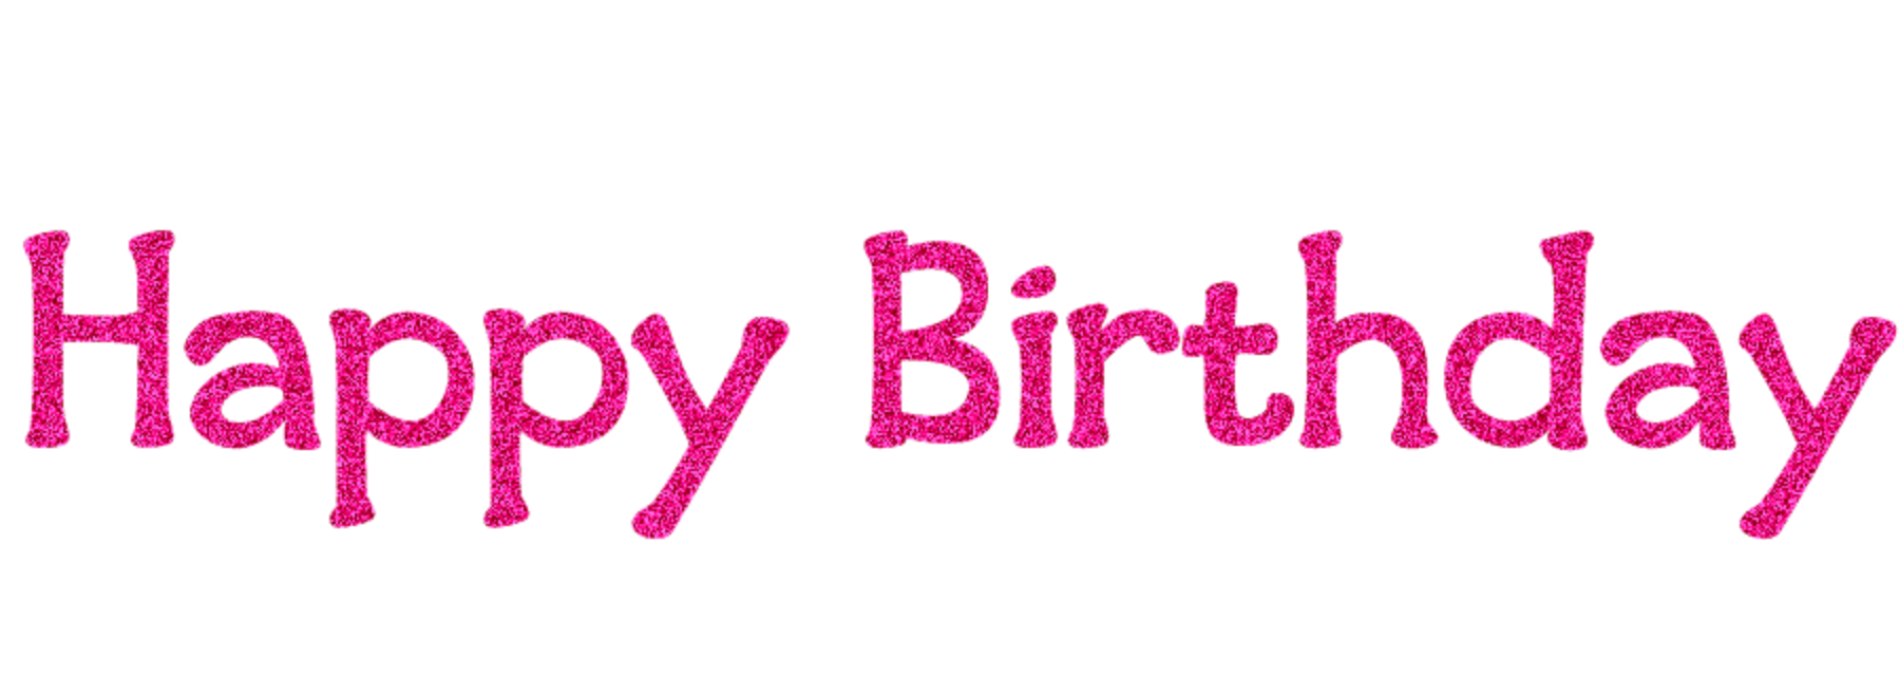 This visual is about ftestickers happybirthday pink freetoedit #ftestickers...